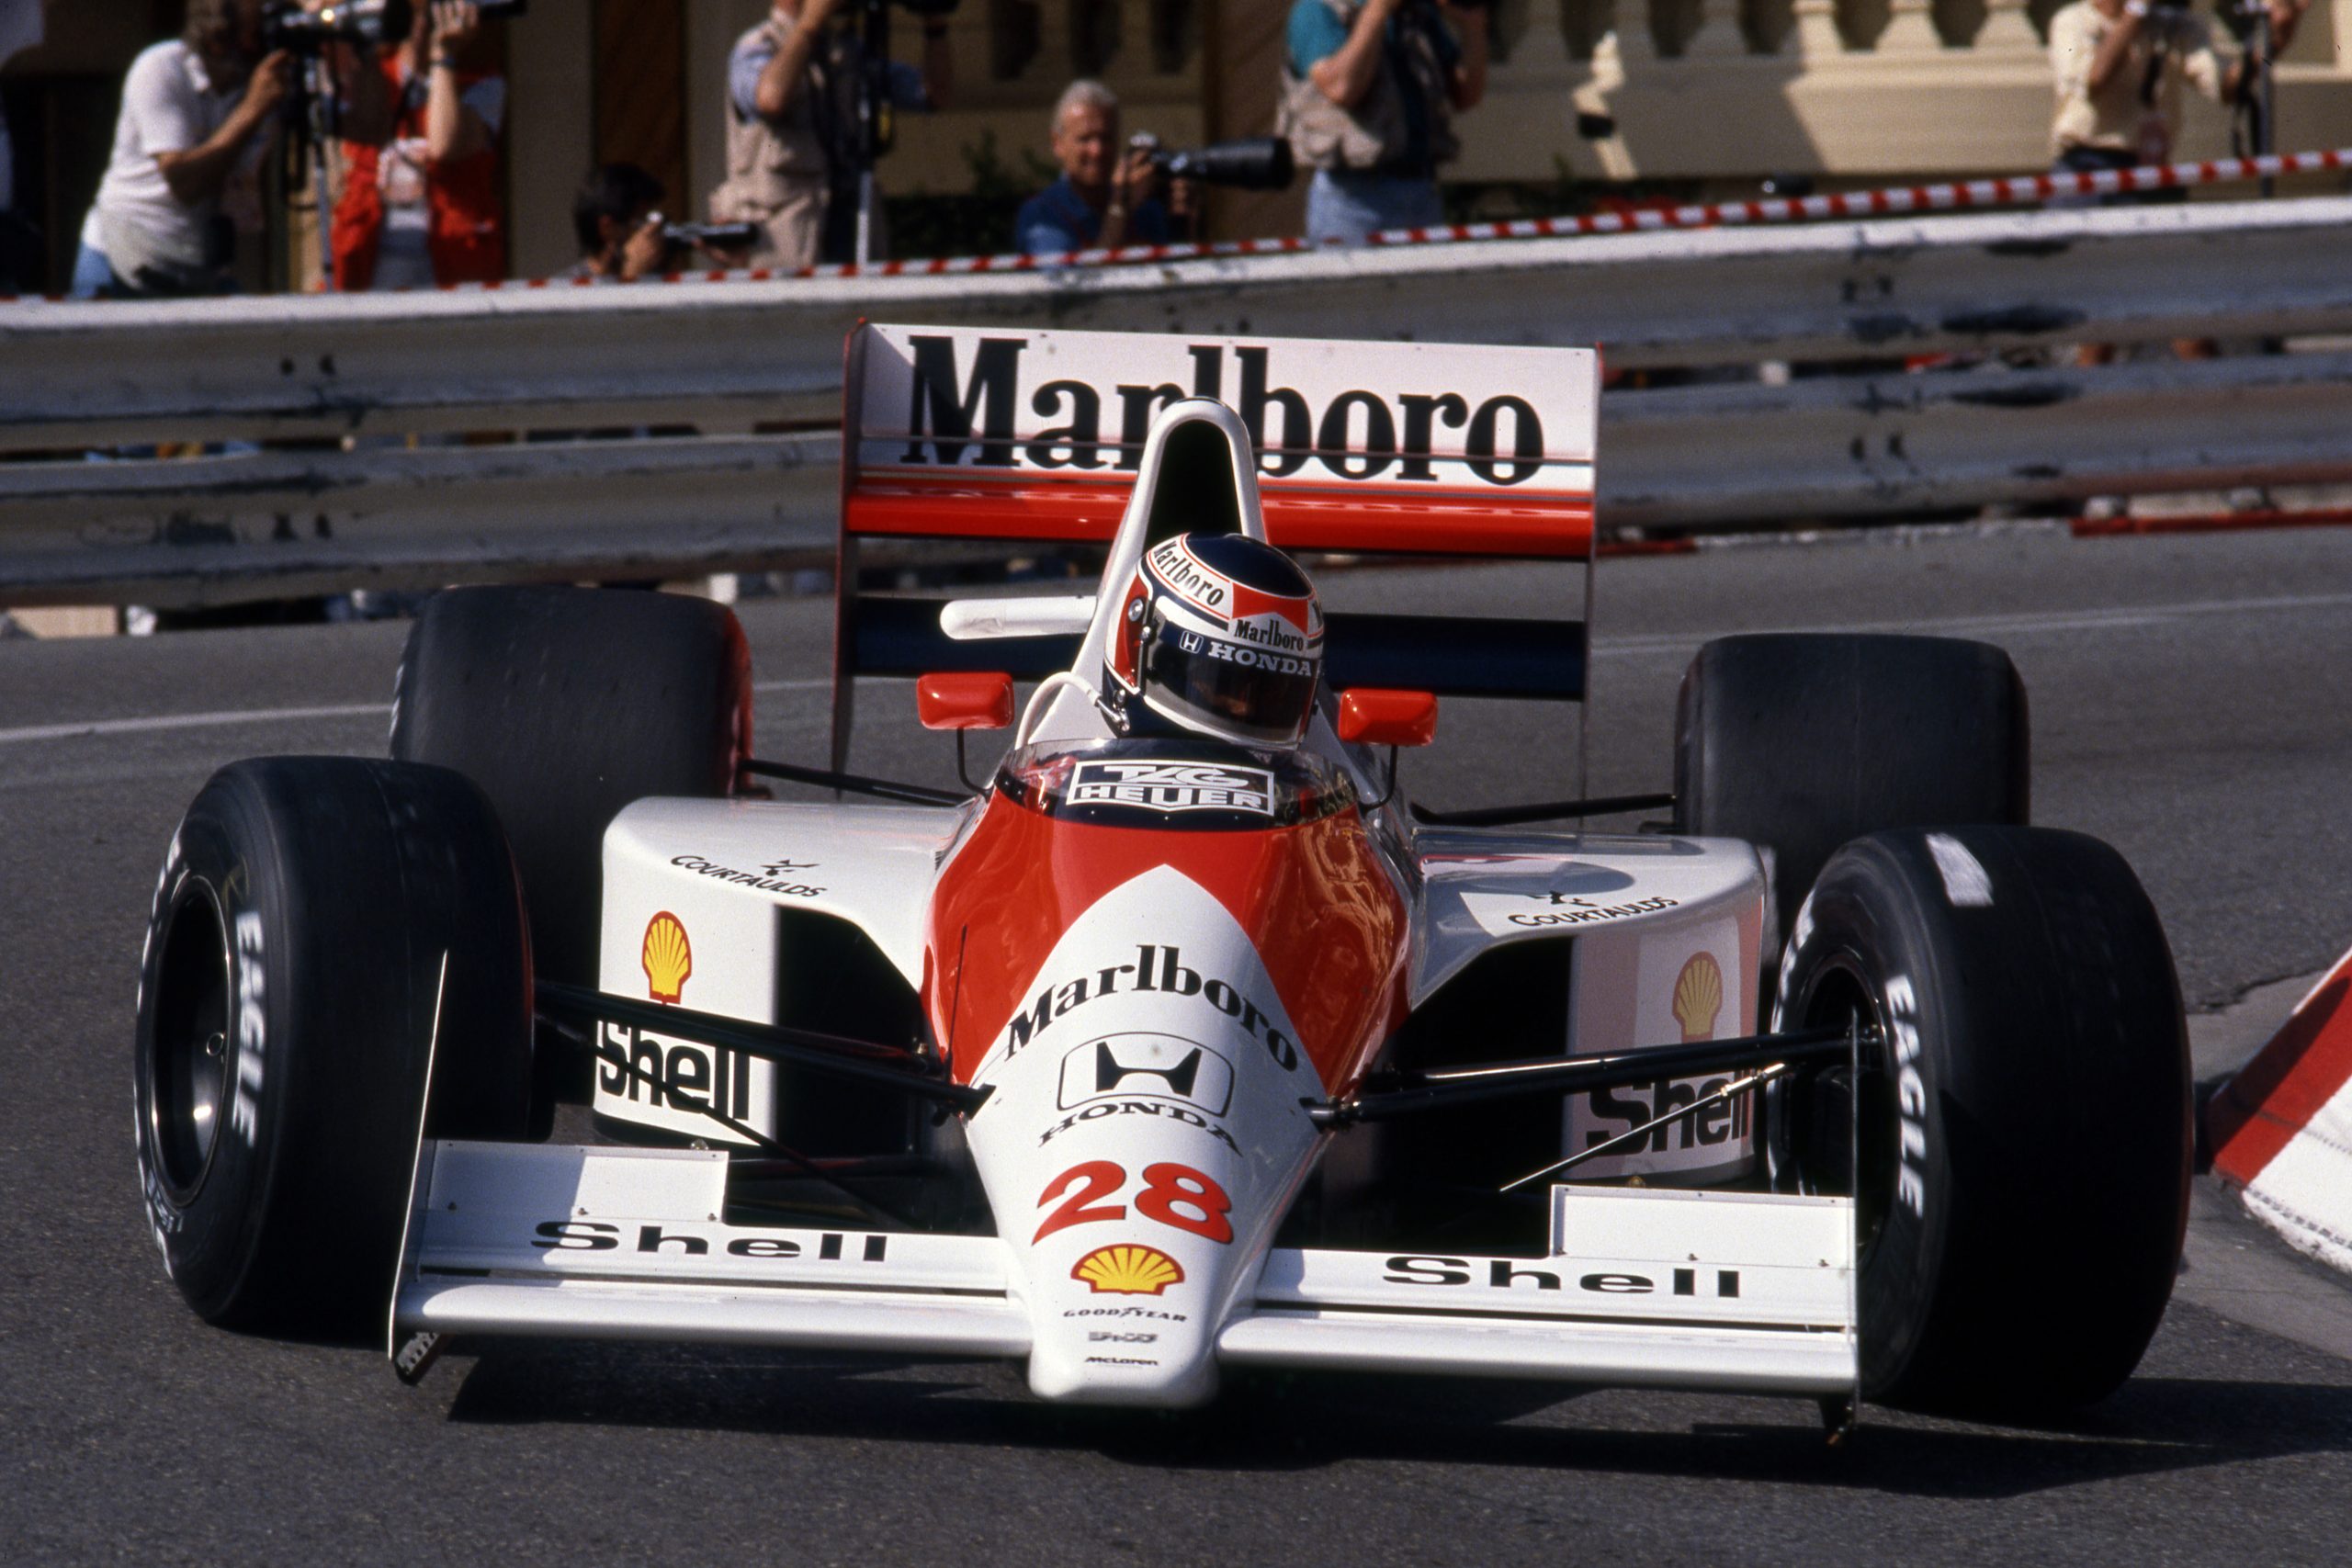 A McLaren MP4/5B driven by Senna is for sale | Hagerty UK